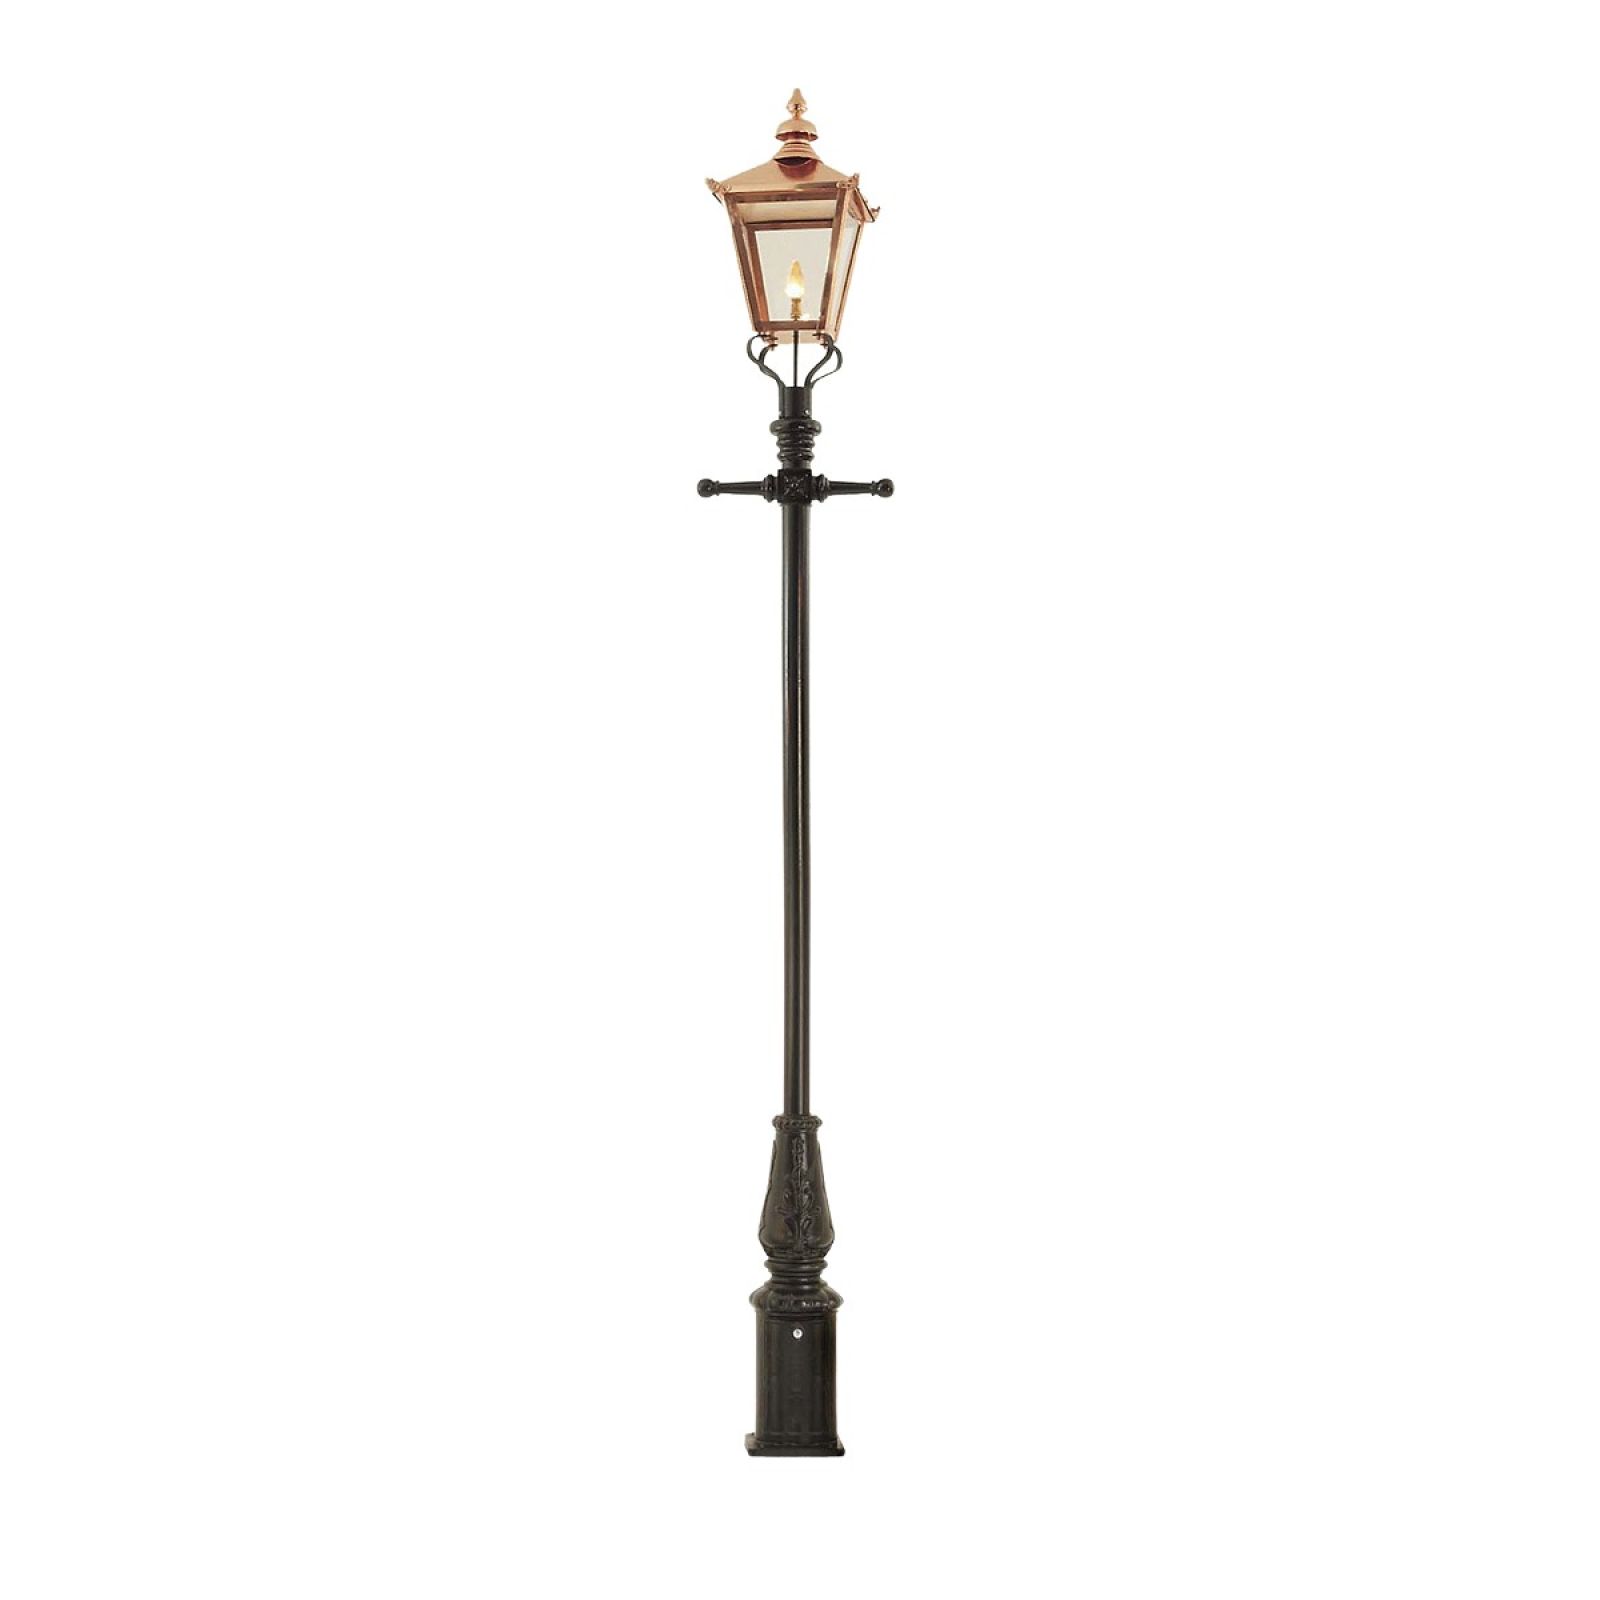 Lamp post 3505mm high and large copper square lantern